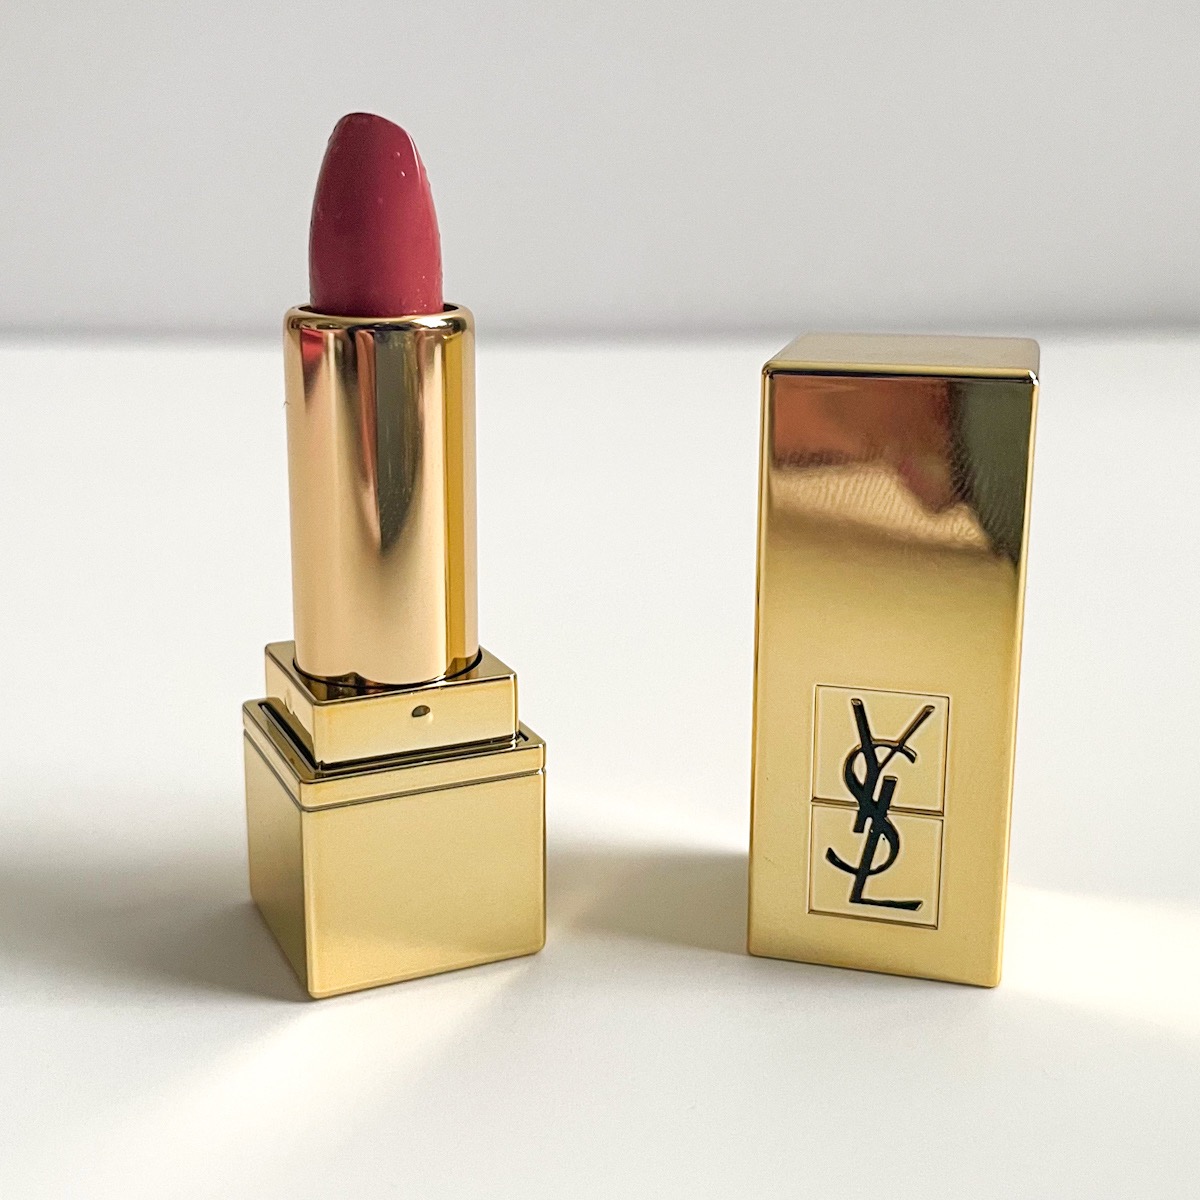 gold lipstick tube opened to show nude lipstick color